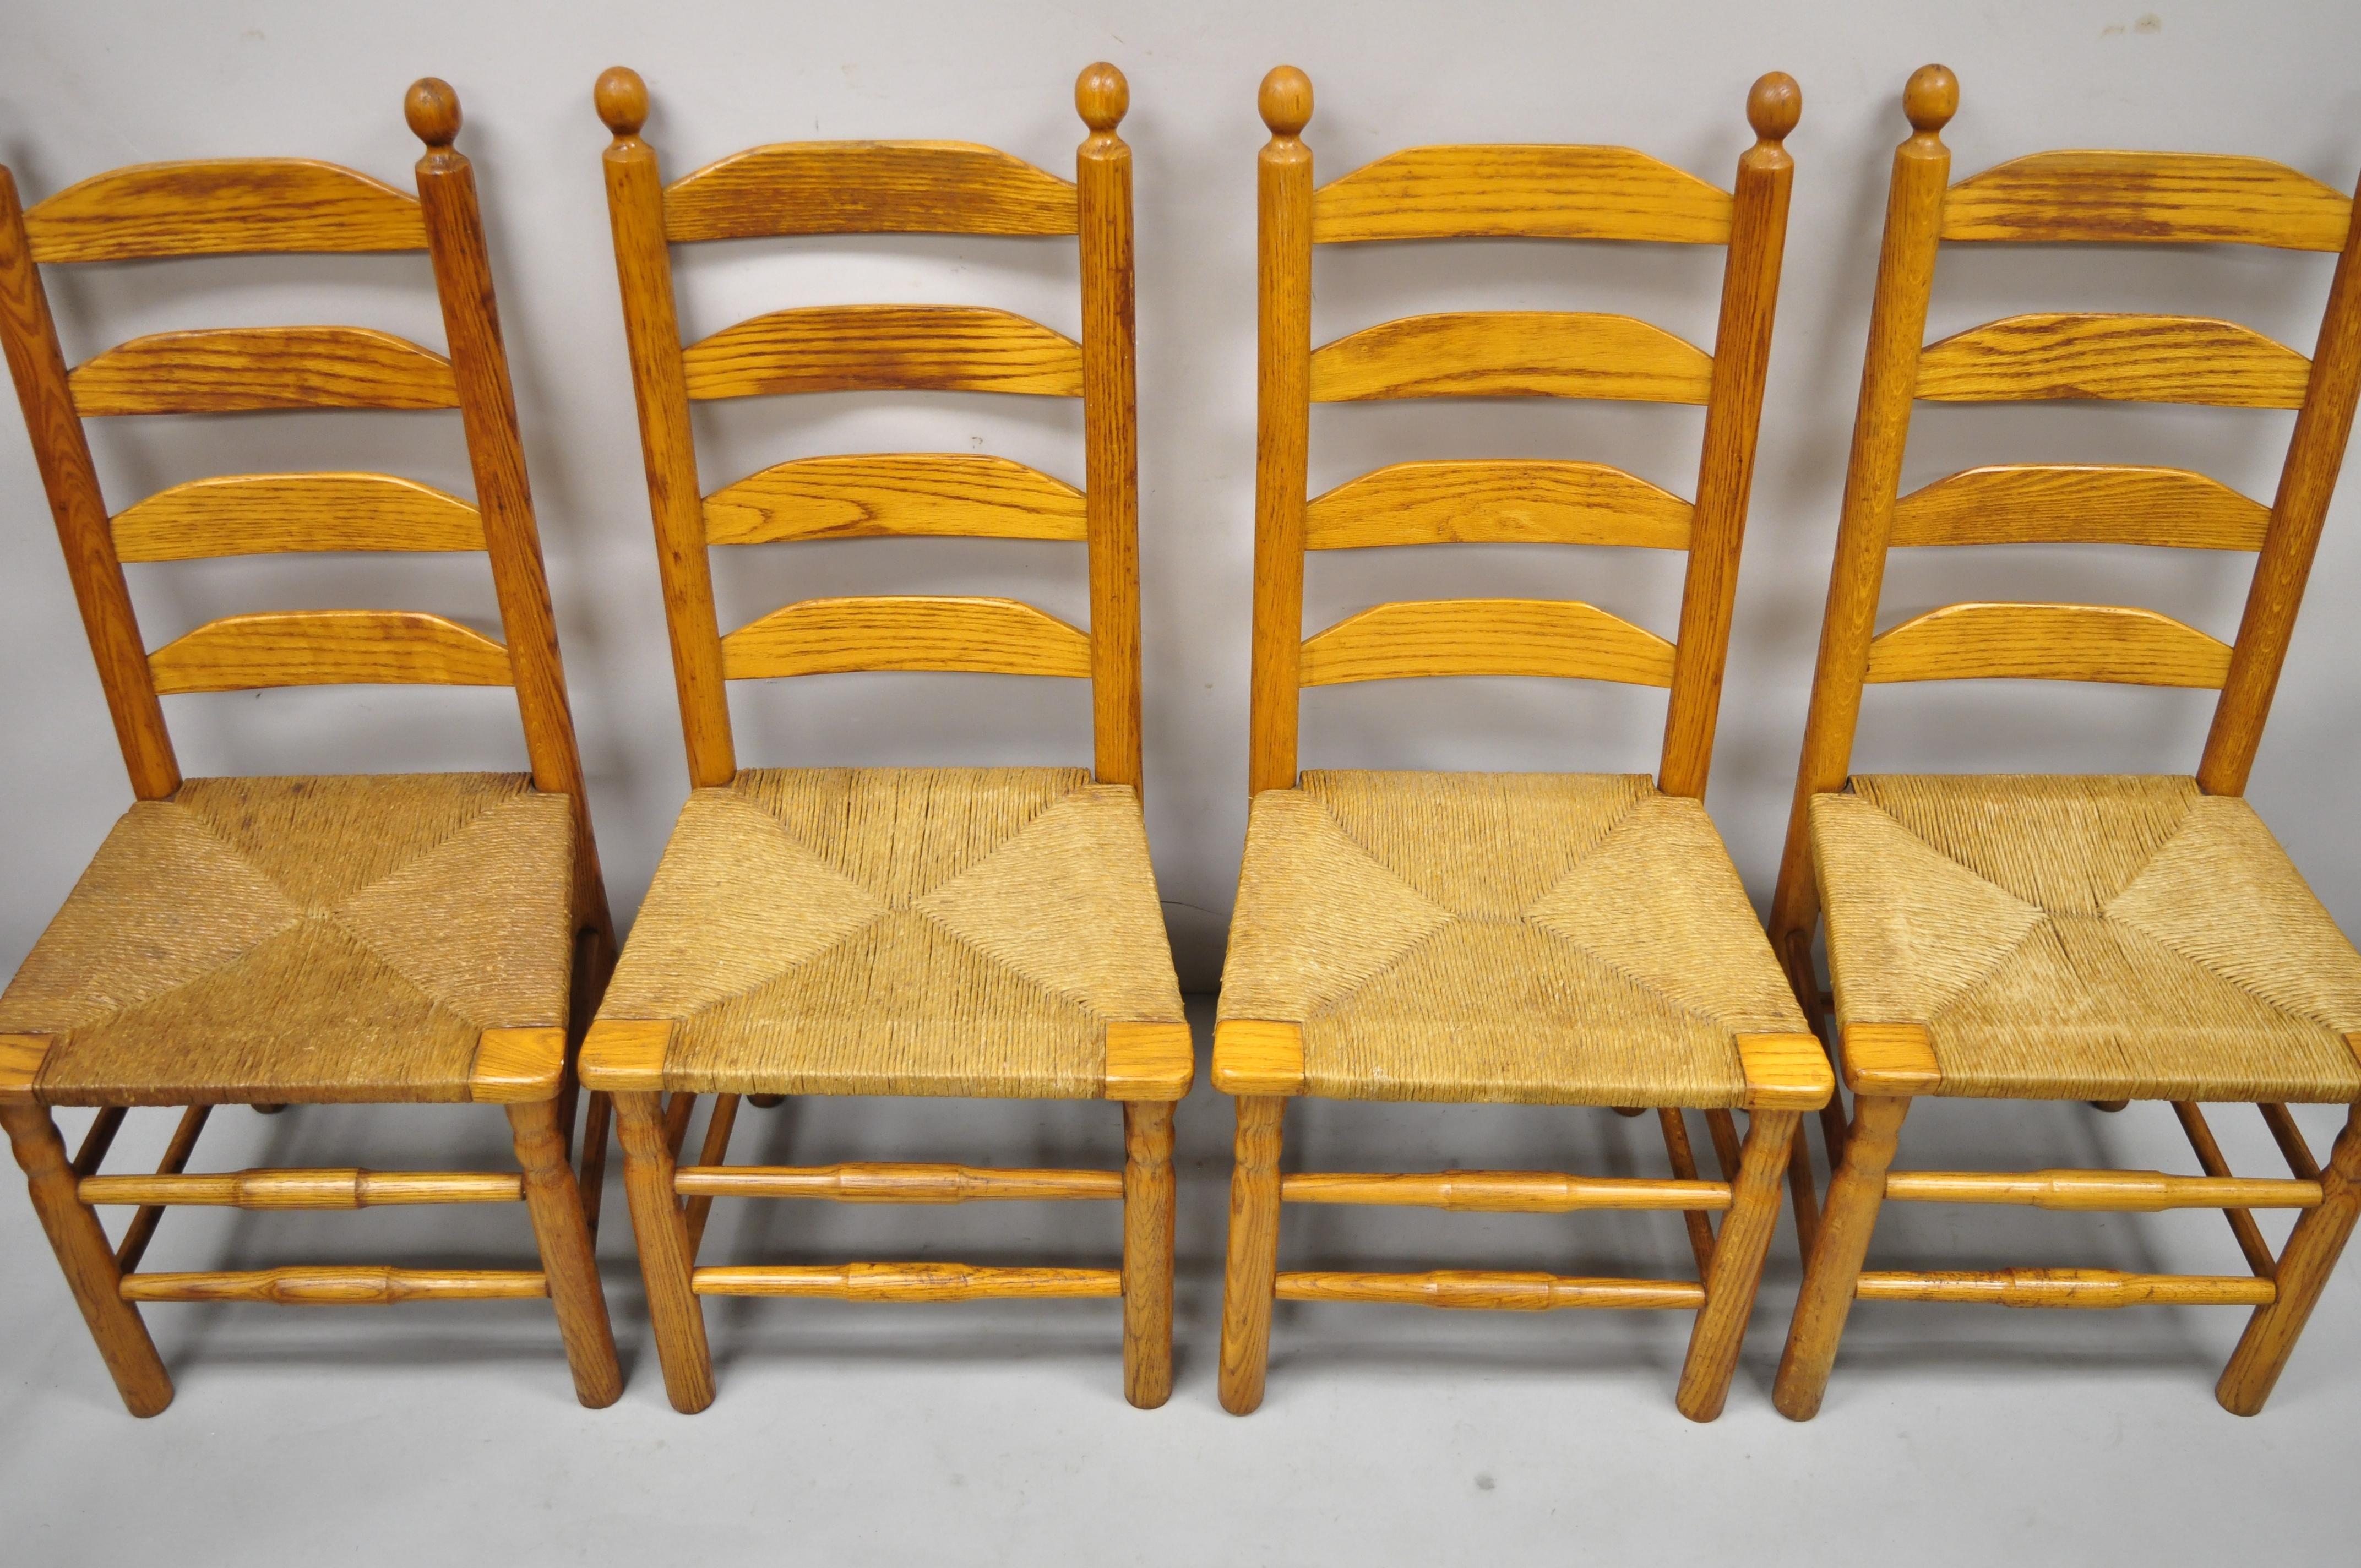 North American Vintage Oak Wood Rush Seat Tall Ladderback Dining Room Rustic Chairs, Set of 6